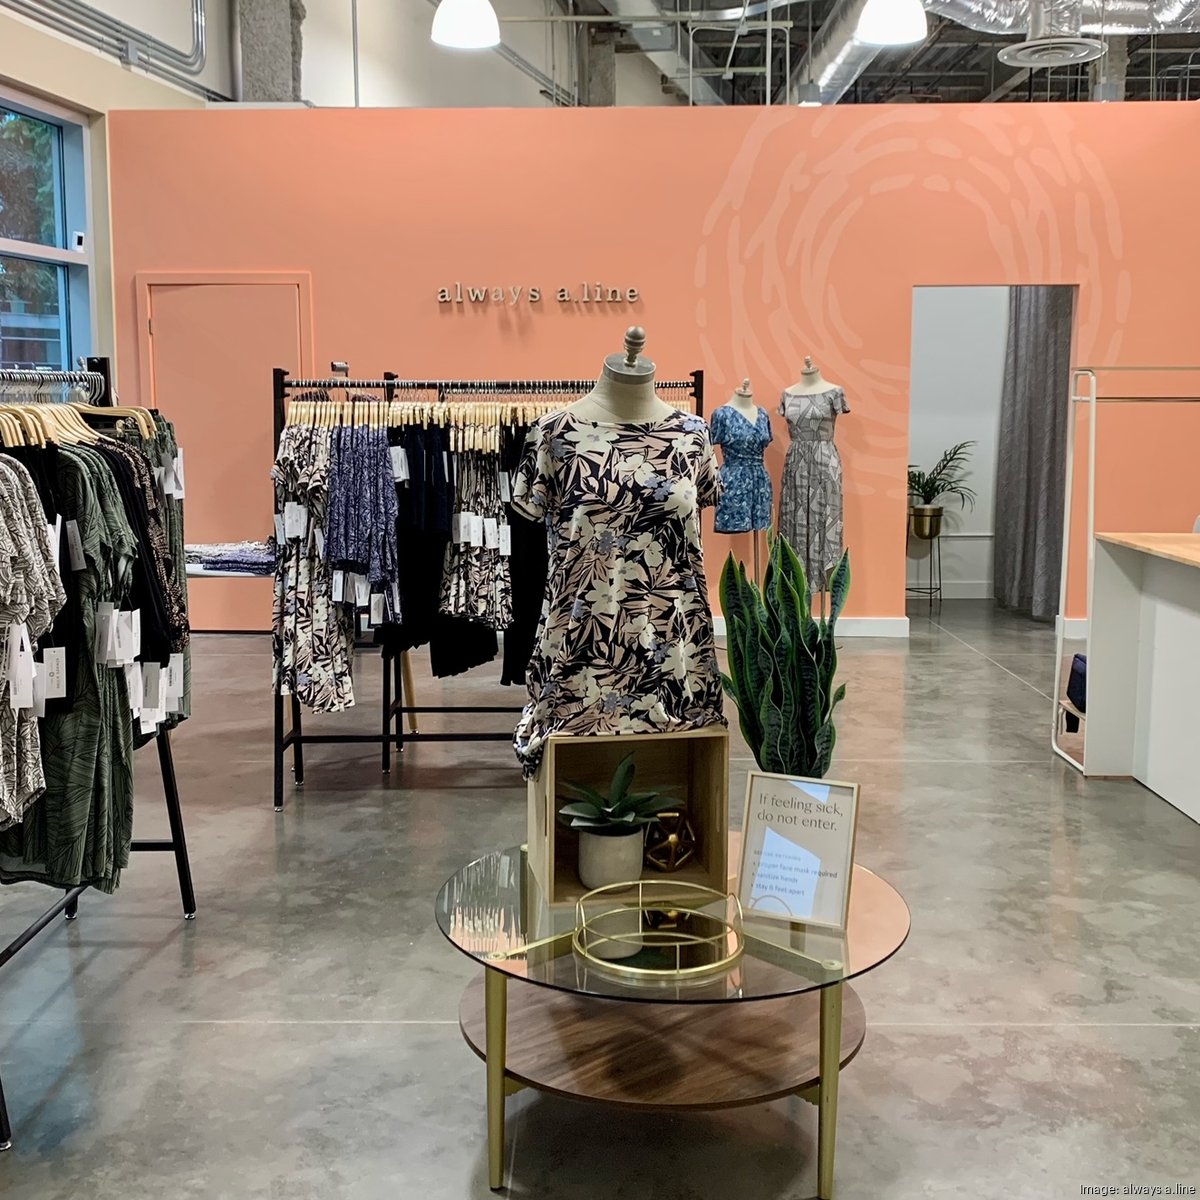 Hawaii-based clothing brand always a.line opens boutique at South Shore  Market - Pacific Business News